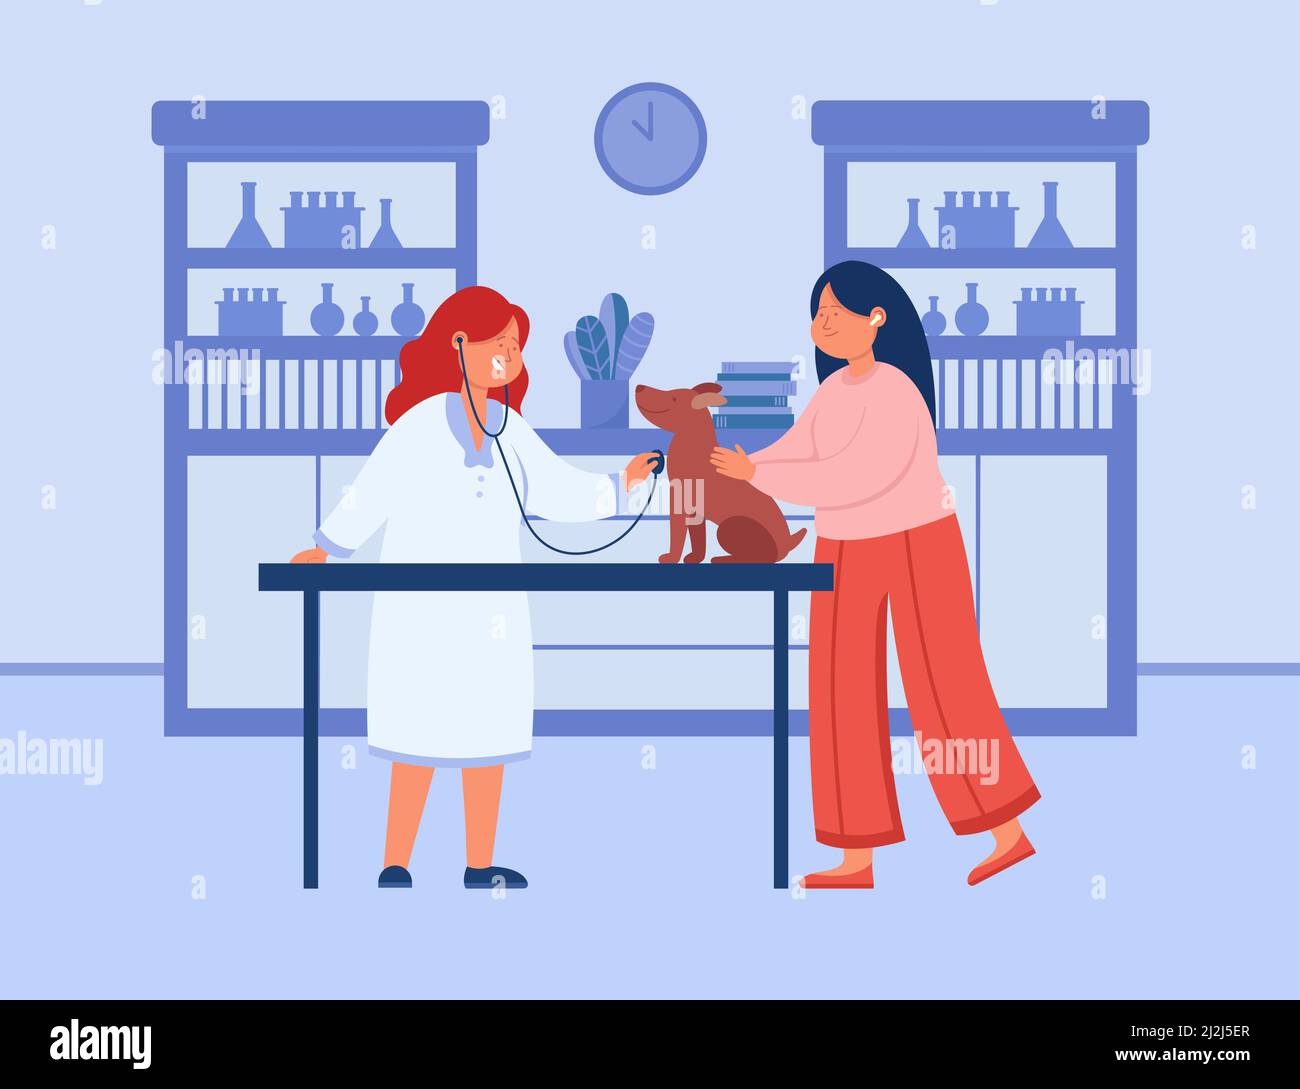 Pet examination by smiling veterinarian in clinic interior. Flat vector illustration. Female cartoon doctor caring about dog and loving owner. Animal, Stock Vector